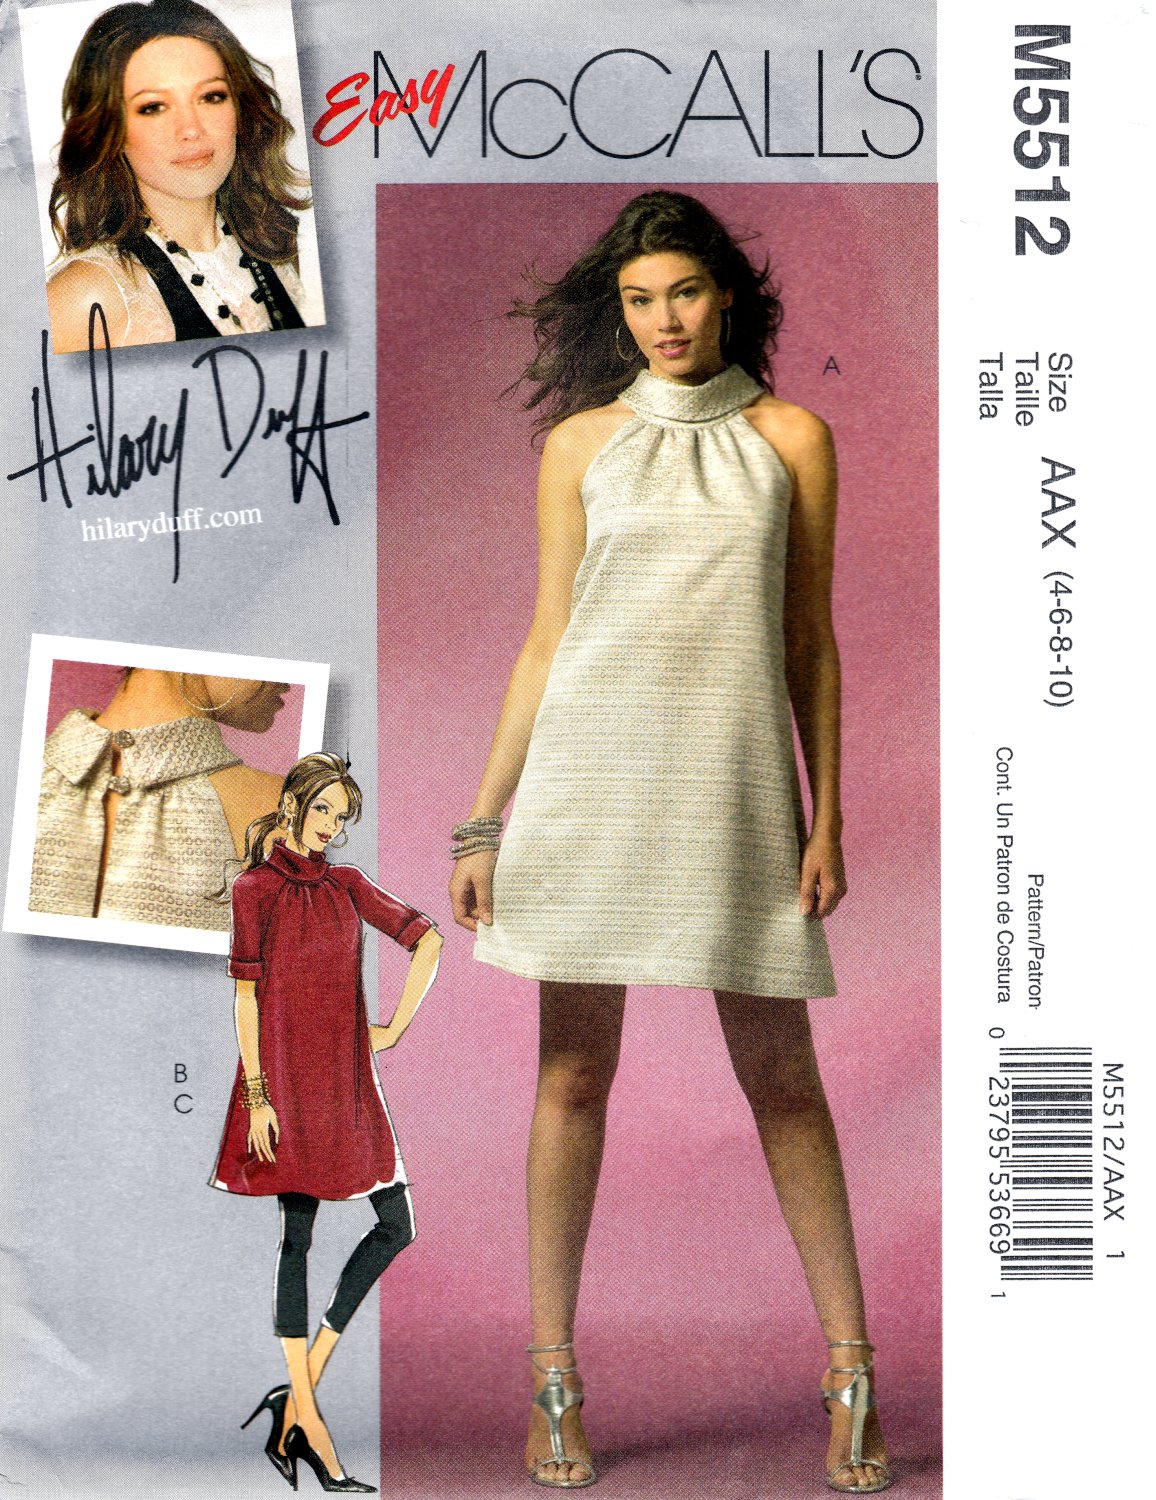 McCall's M5512 Misses Lined Dress and Leggings Loose Fitting Sewing Pattern Sizes 4-6-8-10